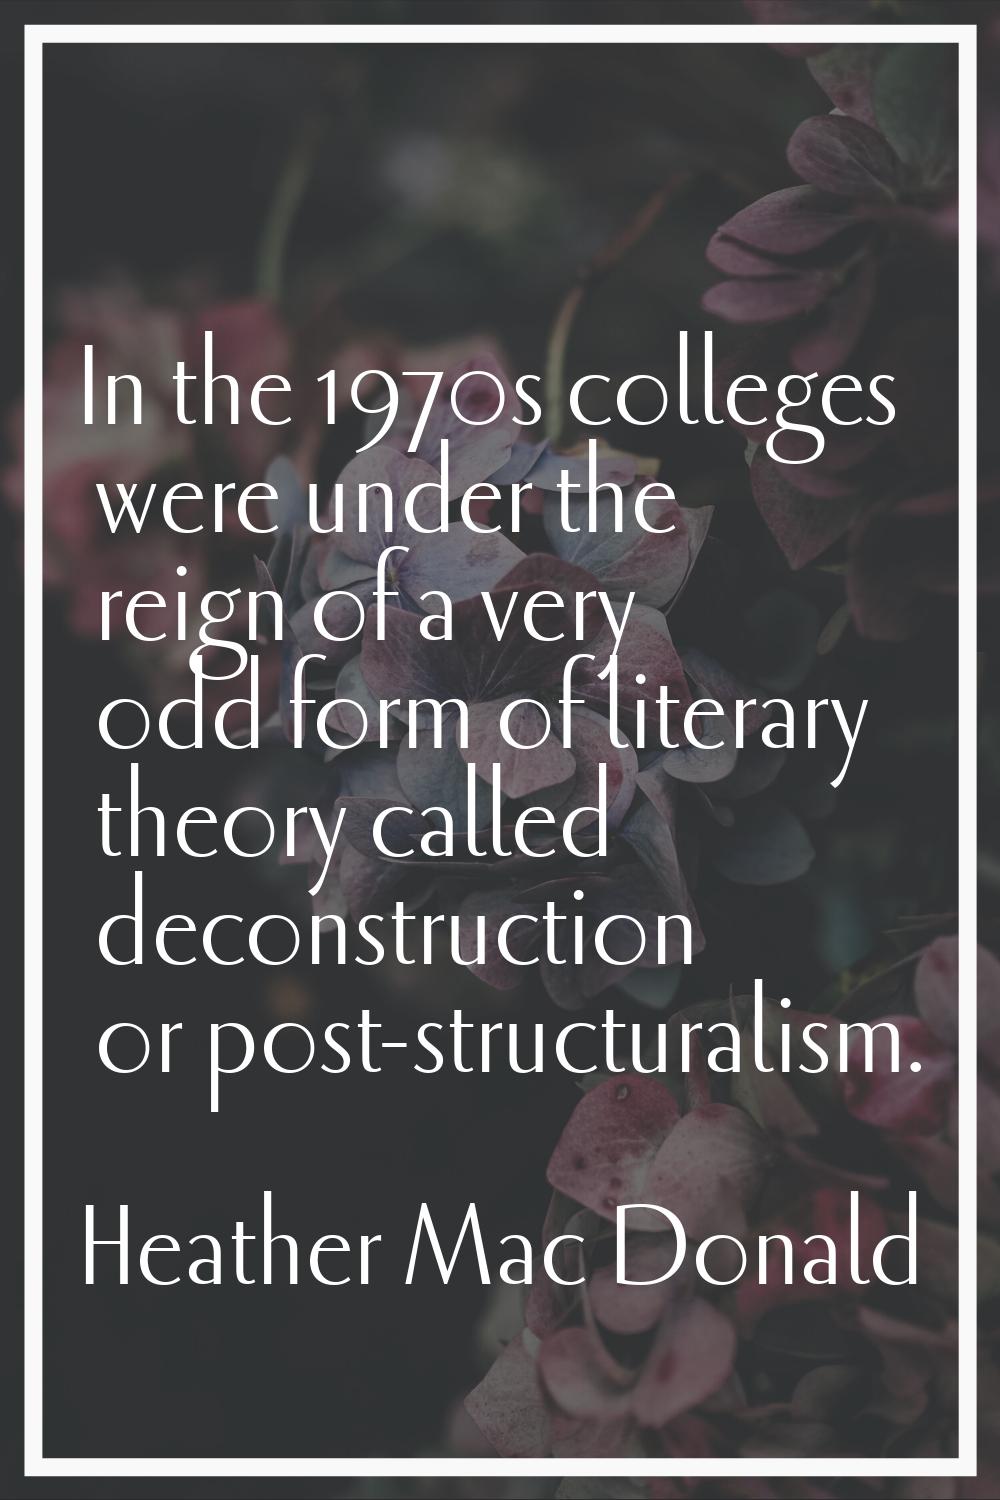 In the 1970s colleges were under the reign of a very odd form of literary theory called deconstruct